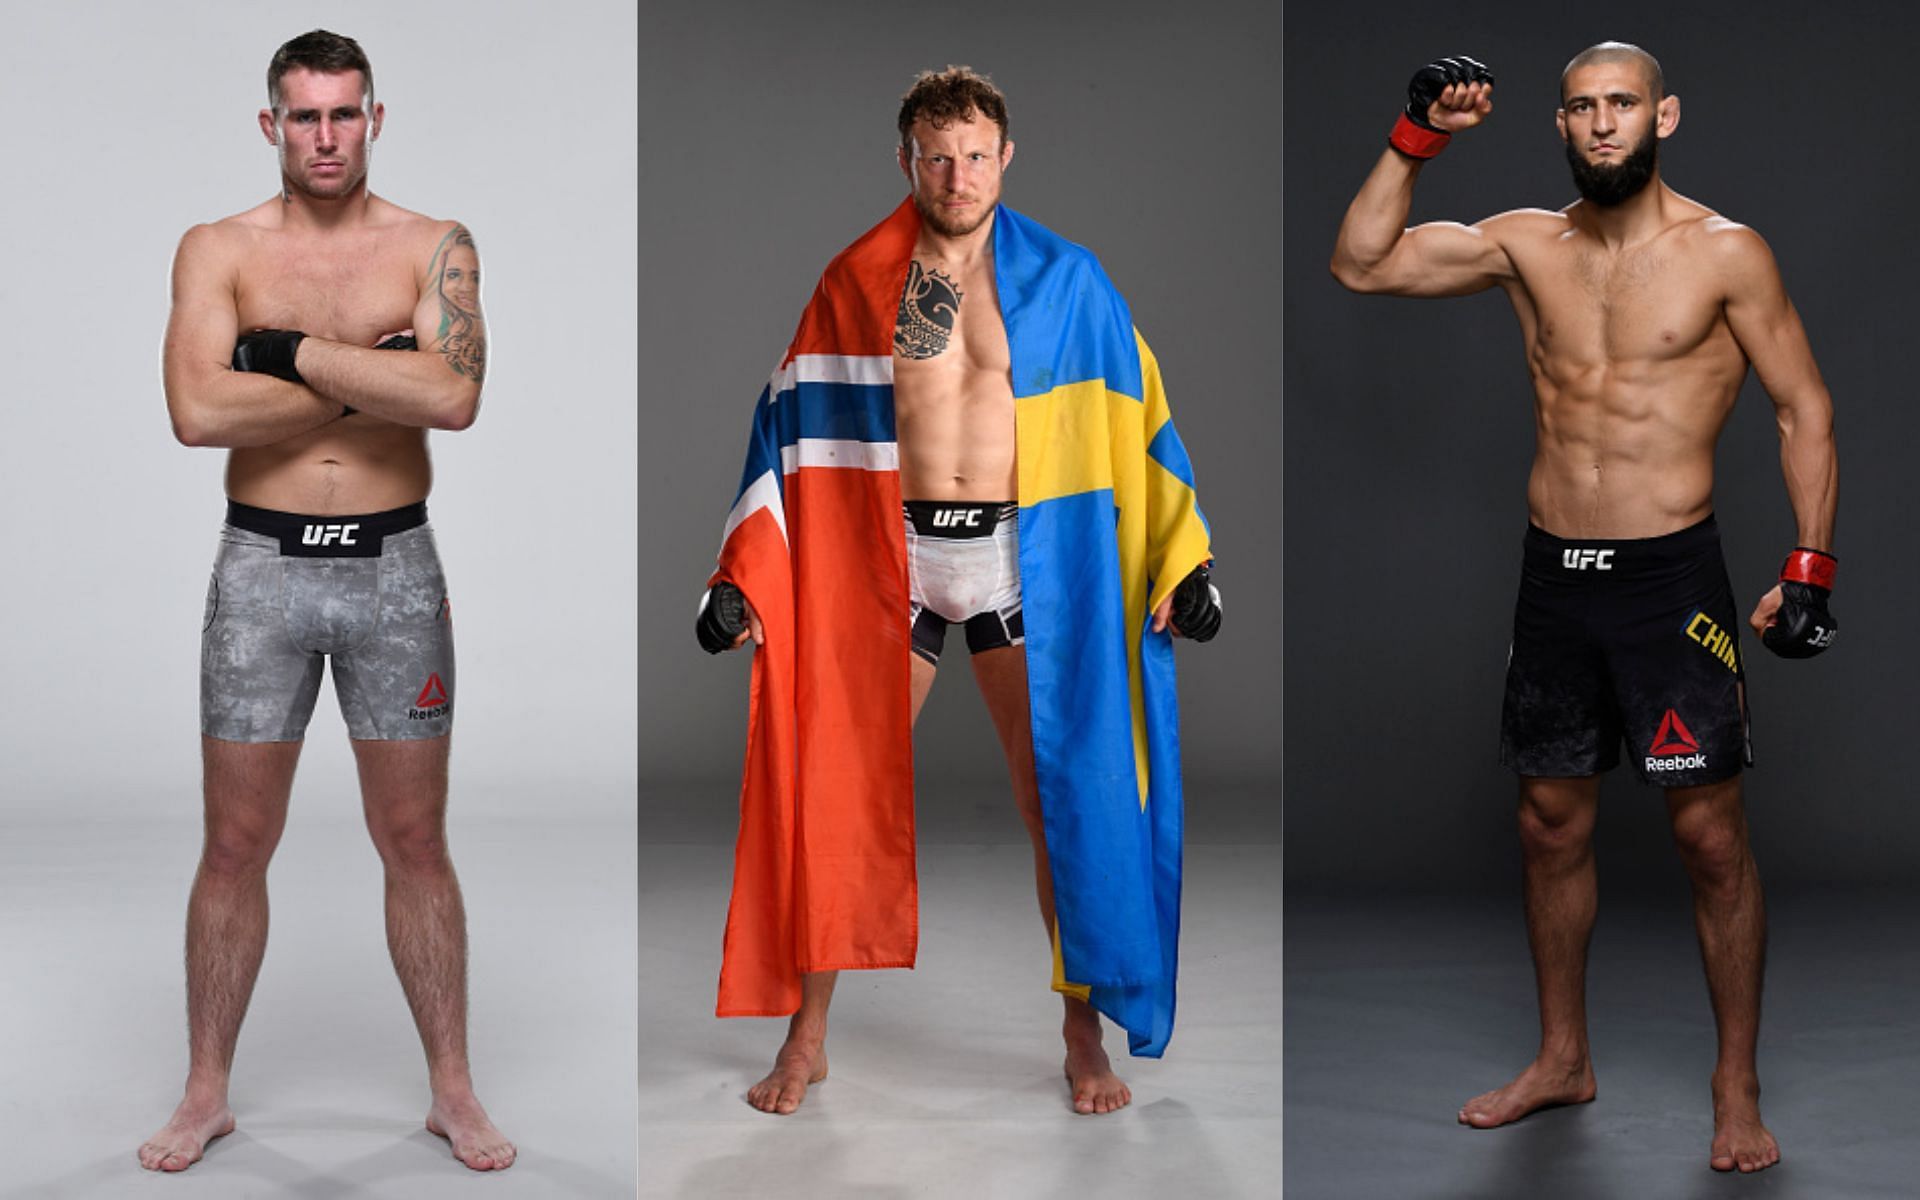 From left to right: Darren Till, Jack Hermansson, and Khamzat Chimaev [Images via Getty]